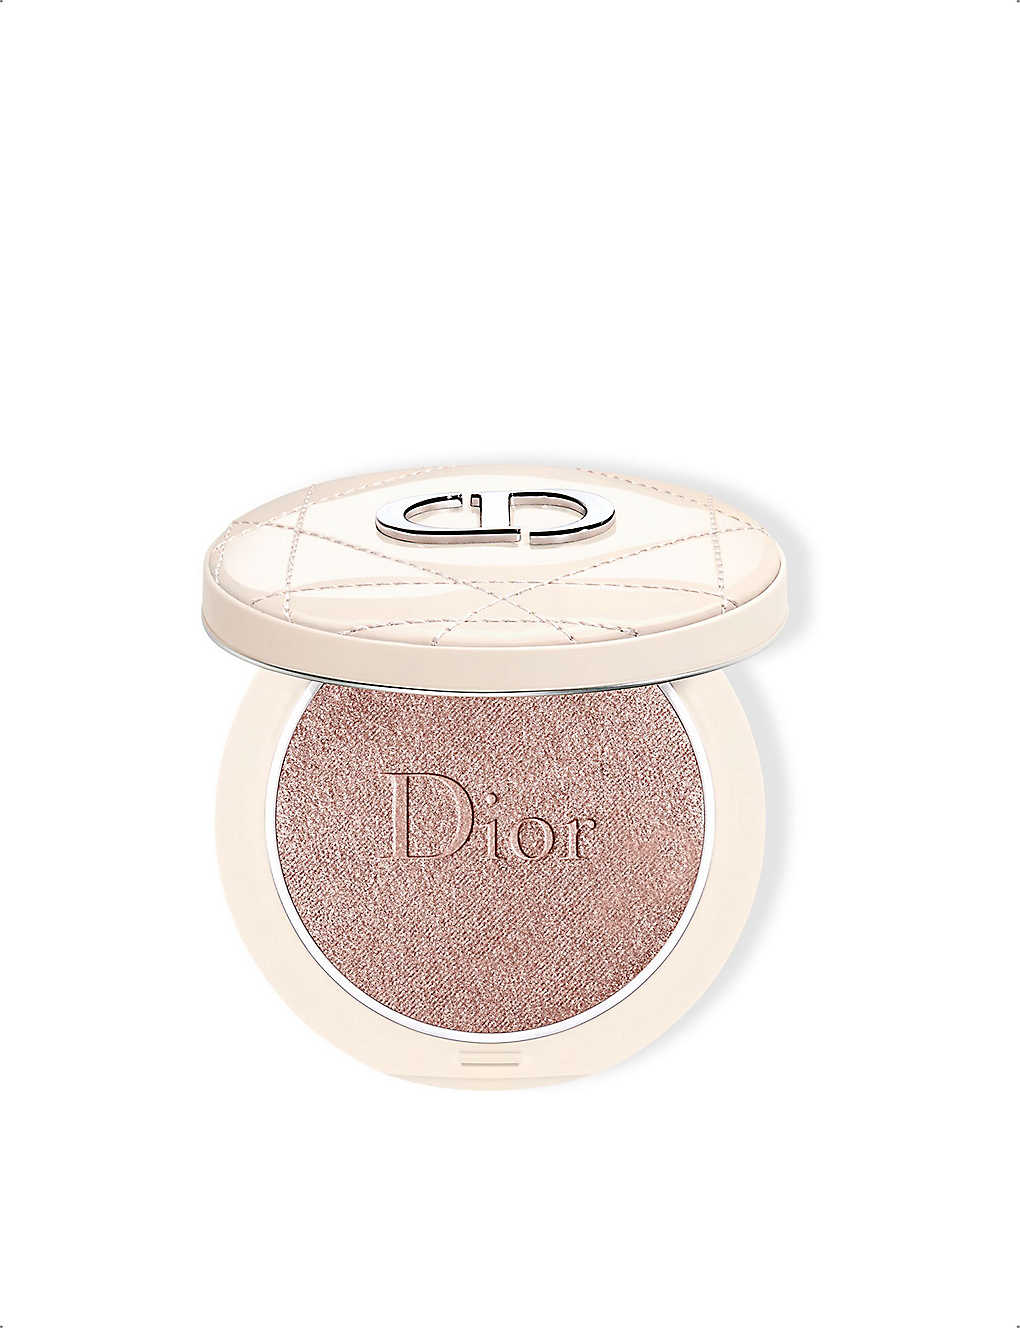 Dior Forever Couture Luminizer Longwear Highlighting Powder 6g In 005